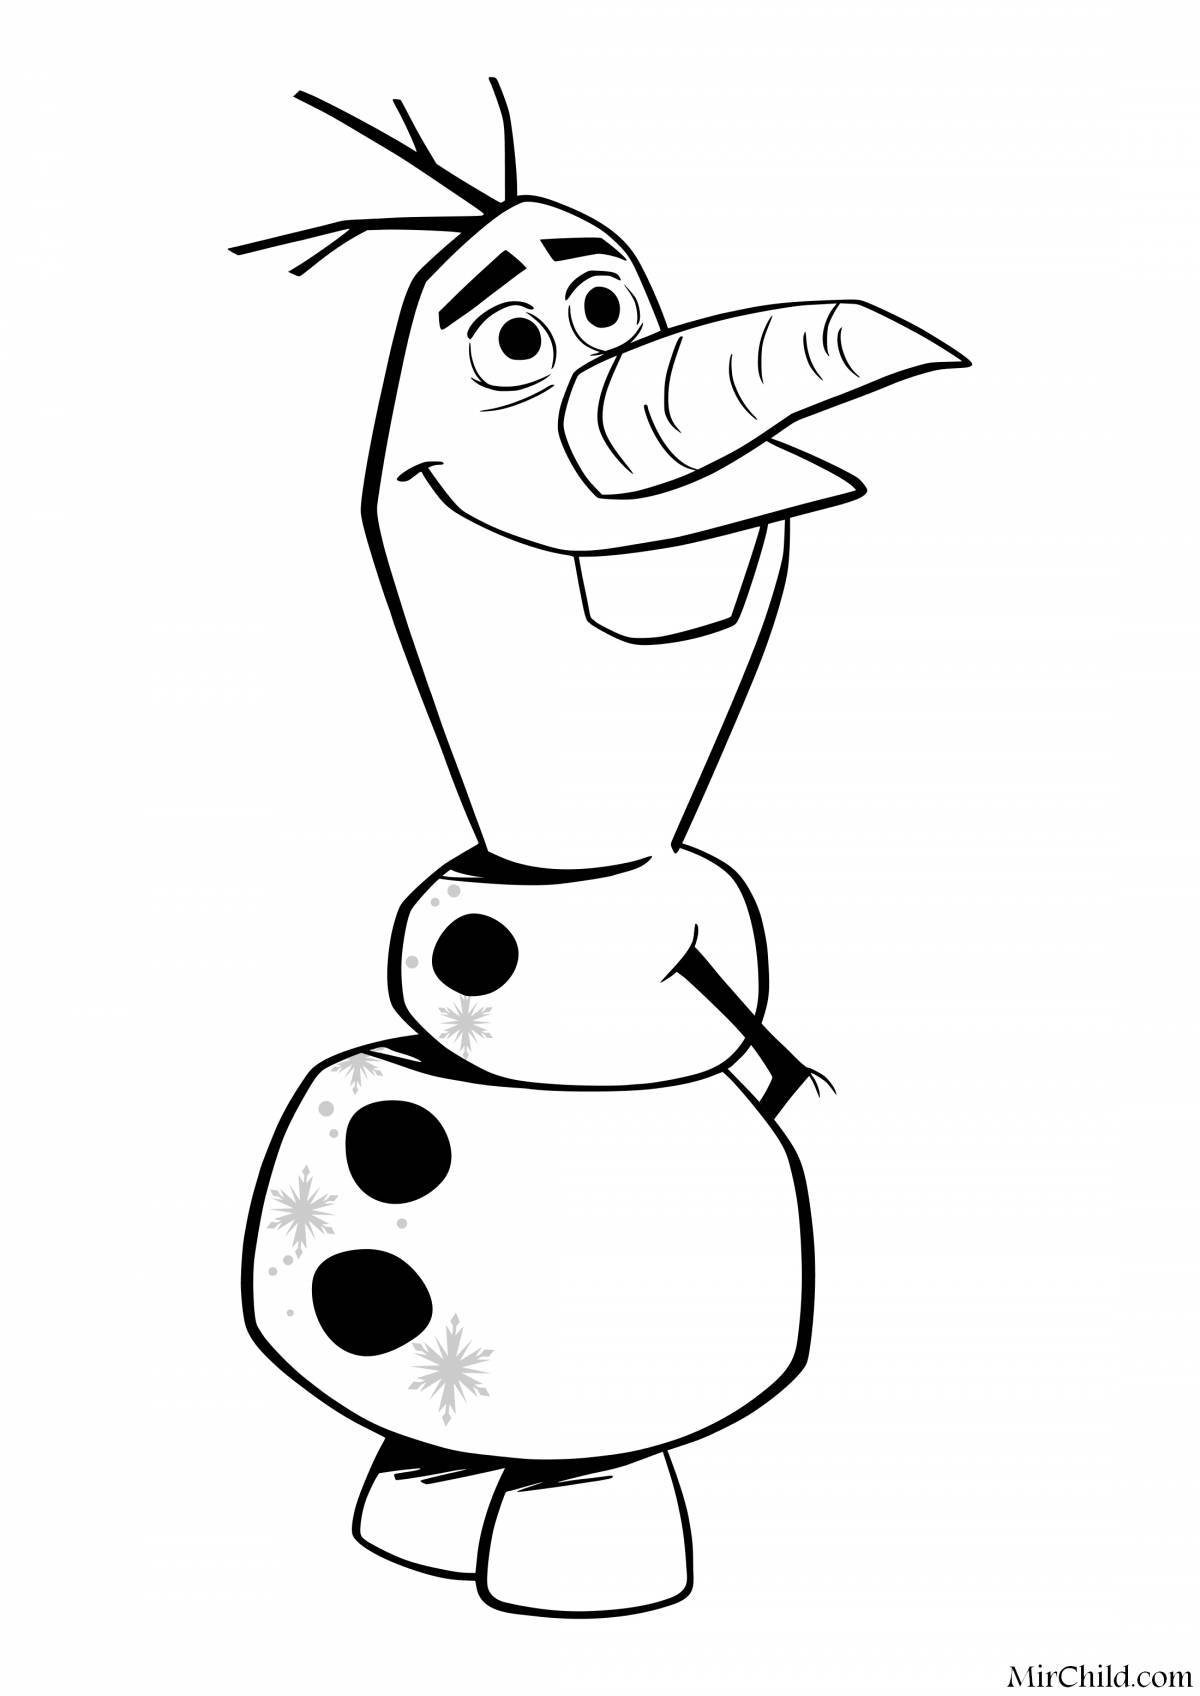 Olaf's witty coloring book